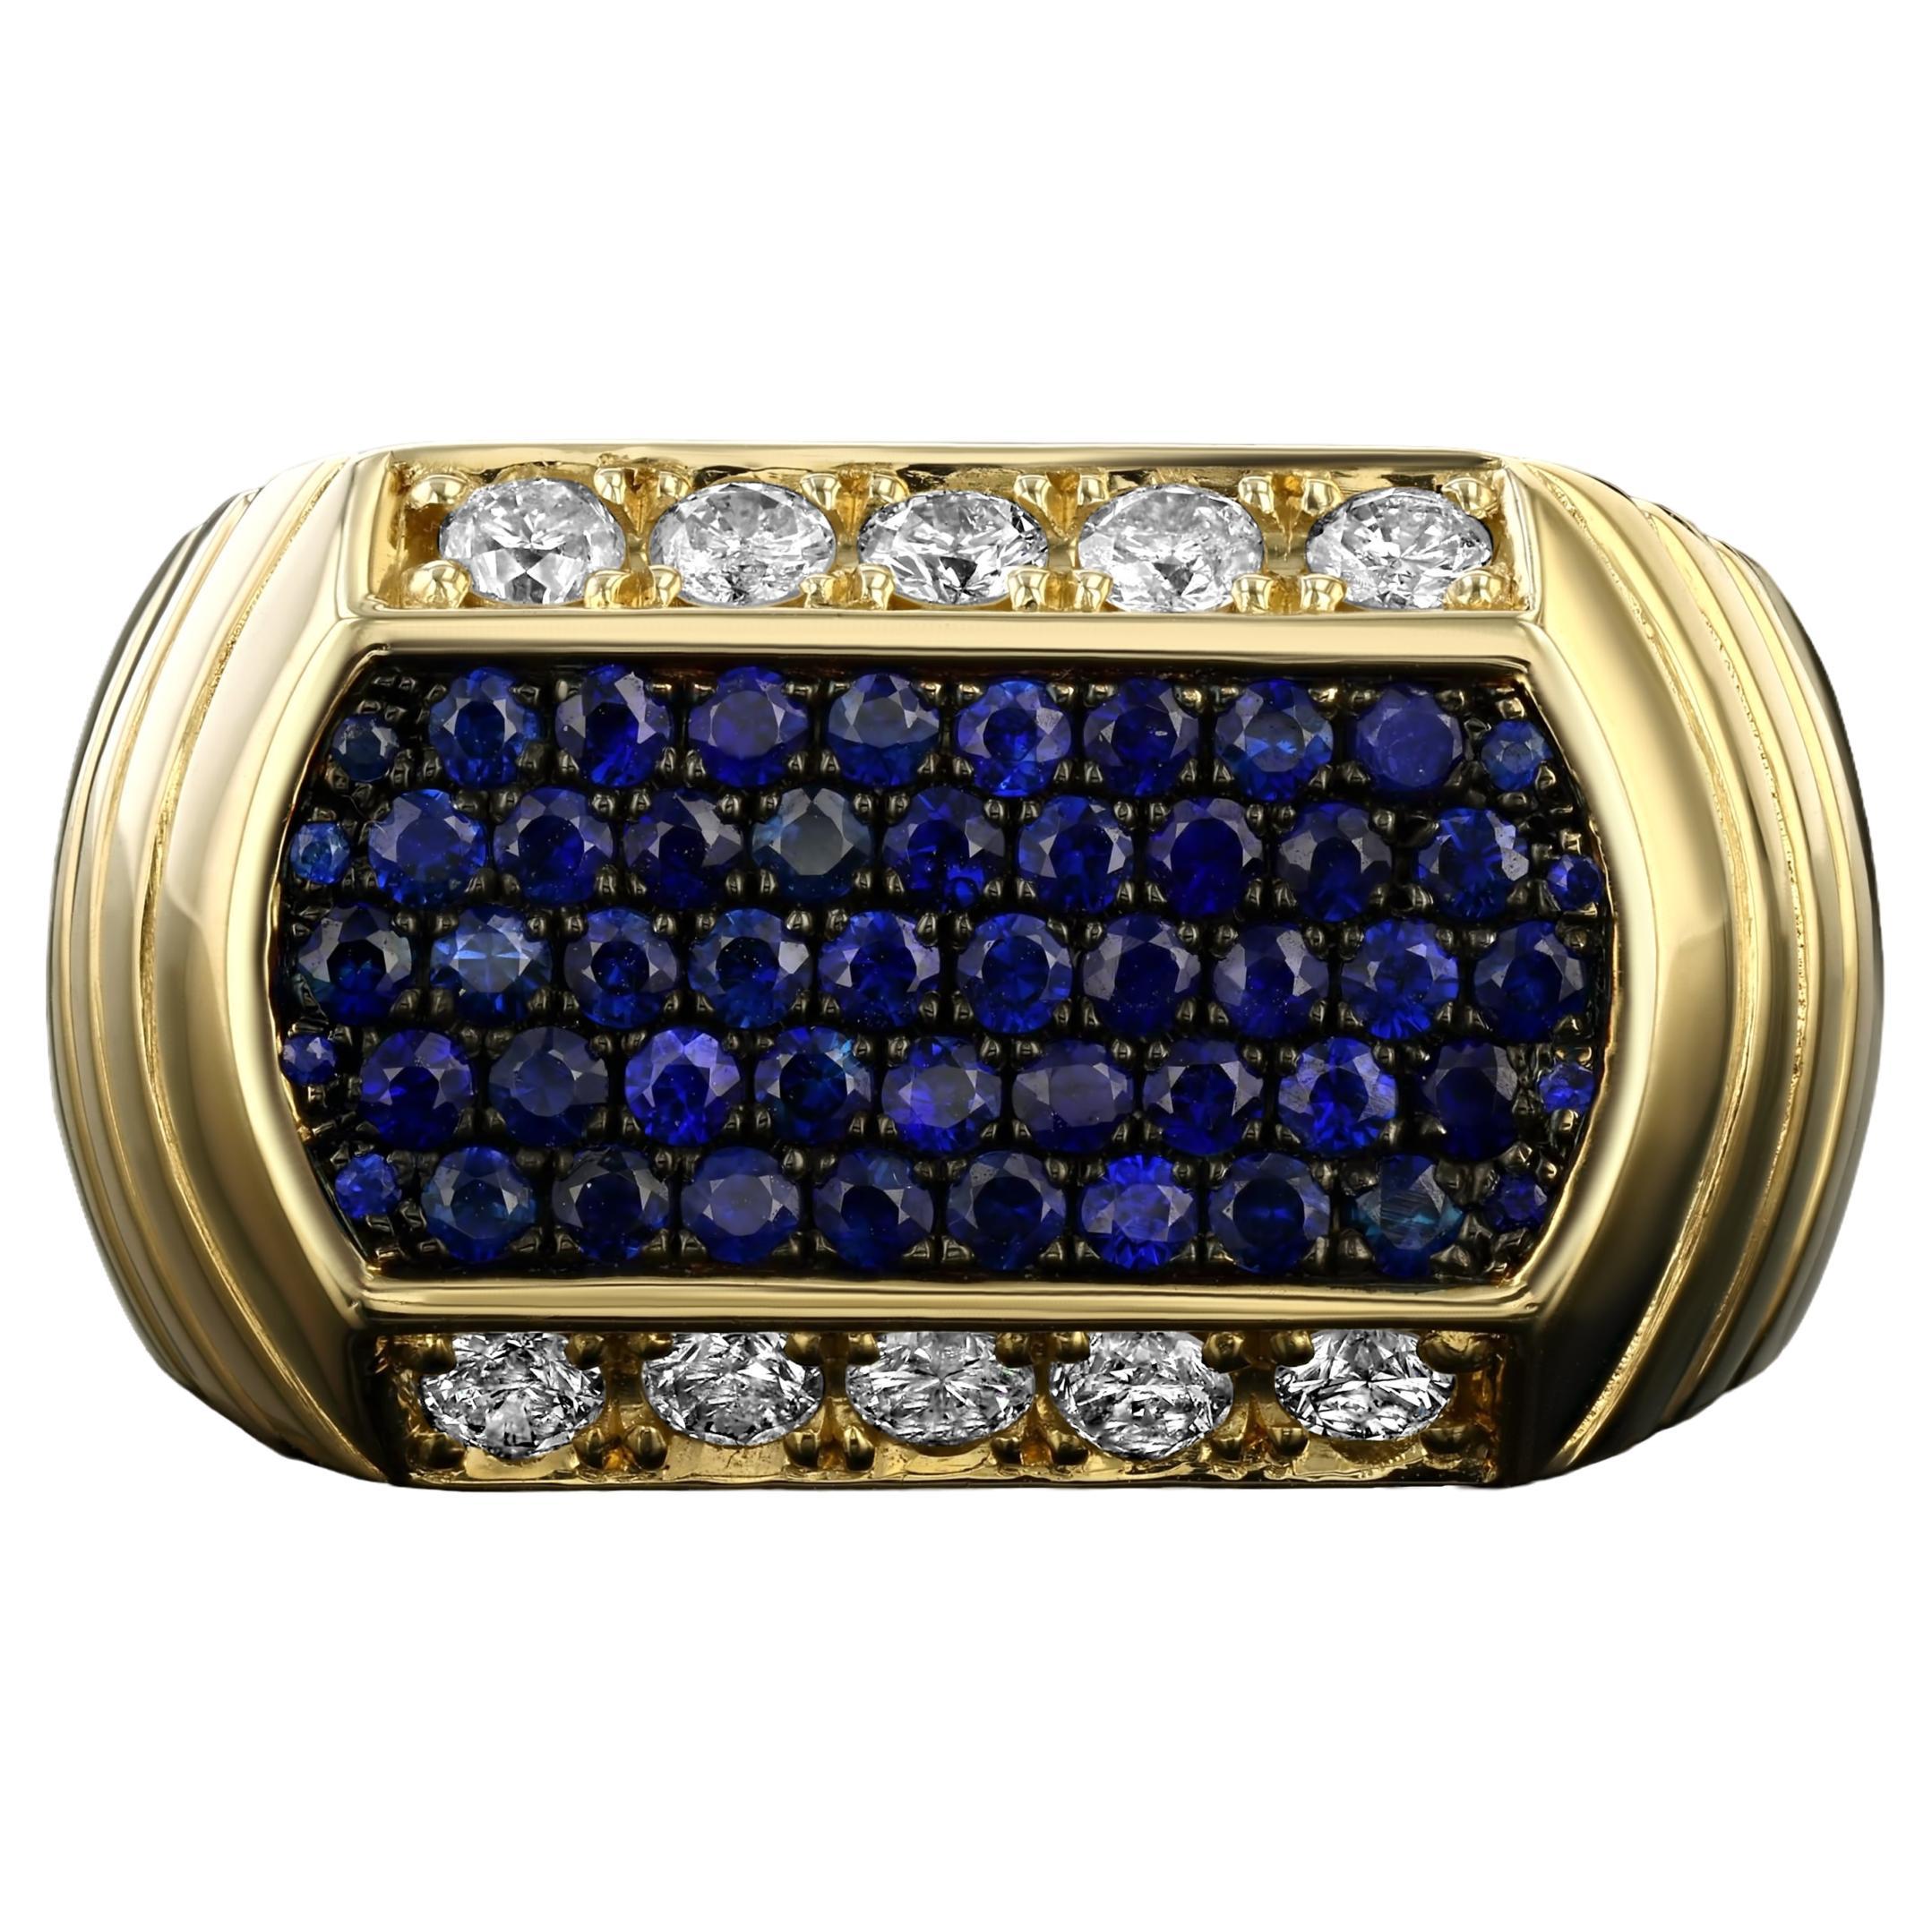 House of RAVN, 14k Gold Unisex Art Deco Signet Ring, with Diamonds and Sapphires